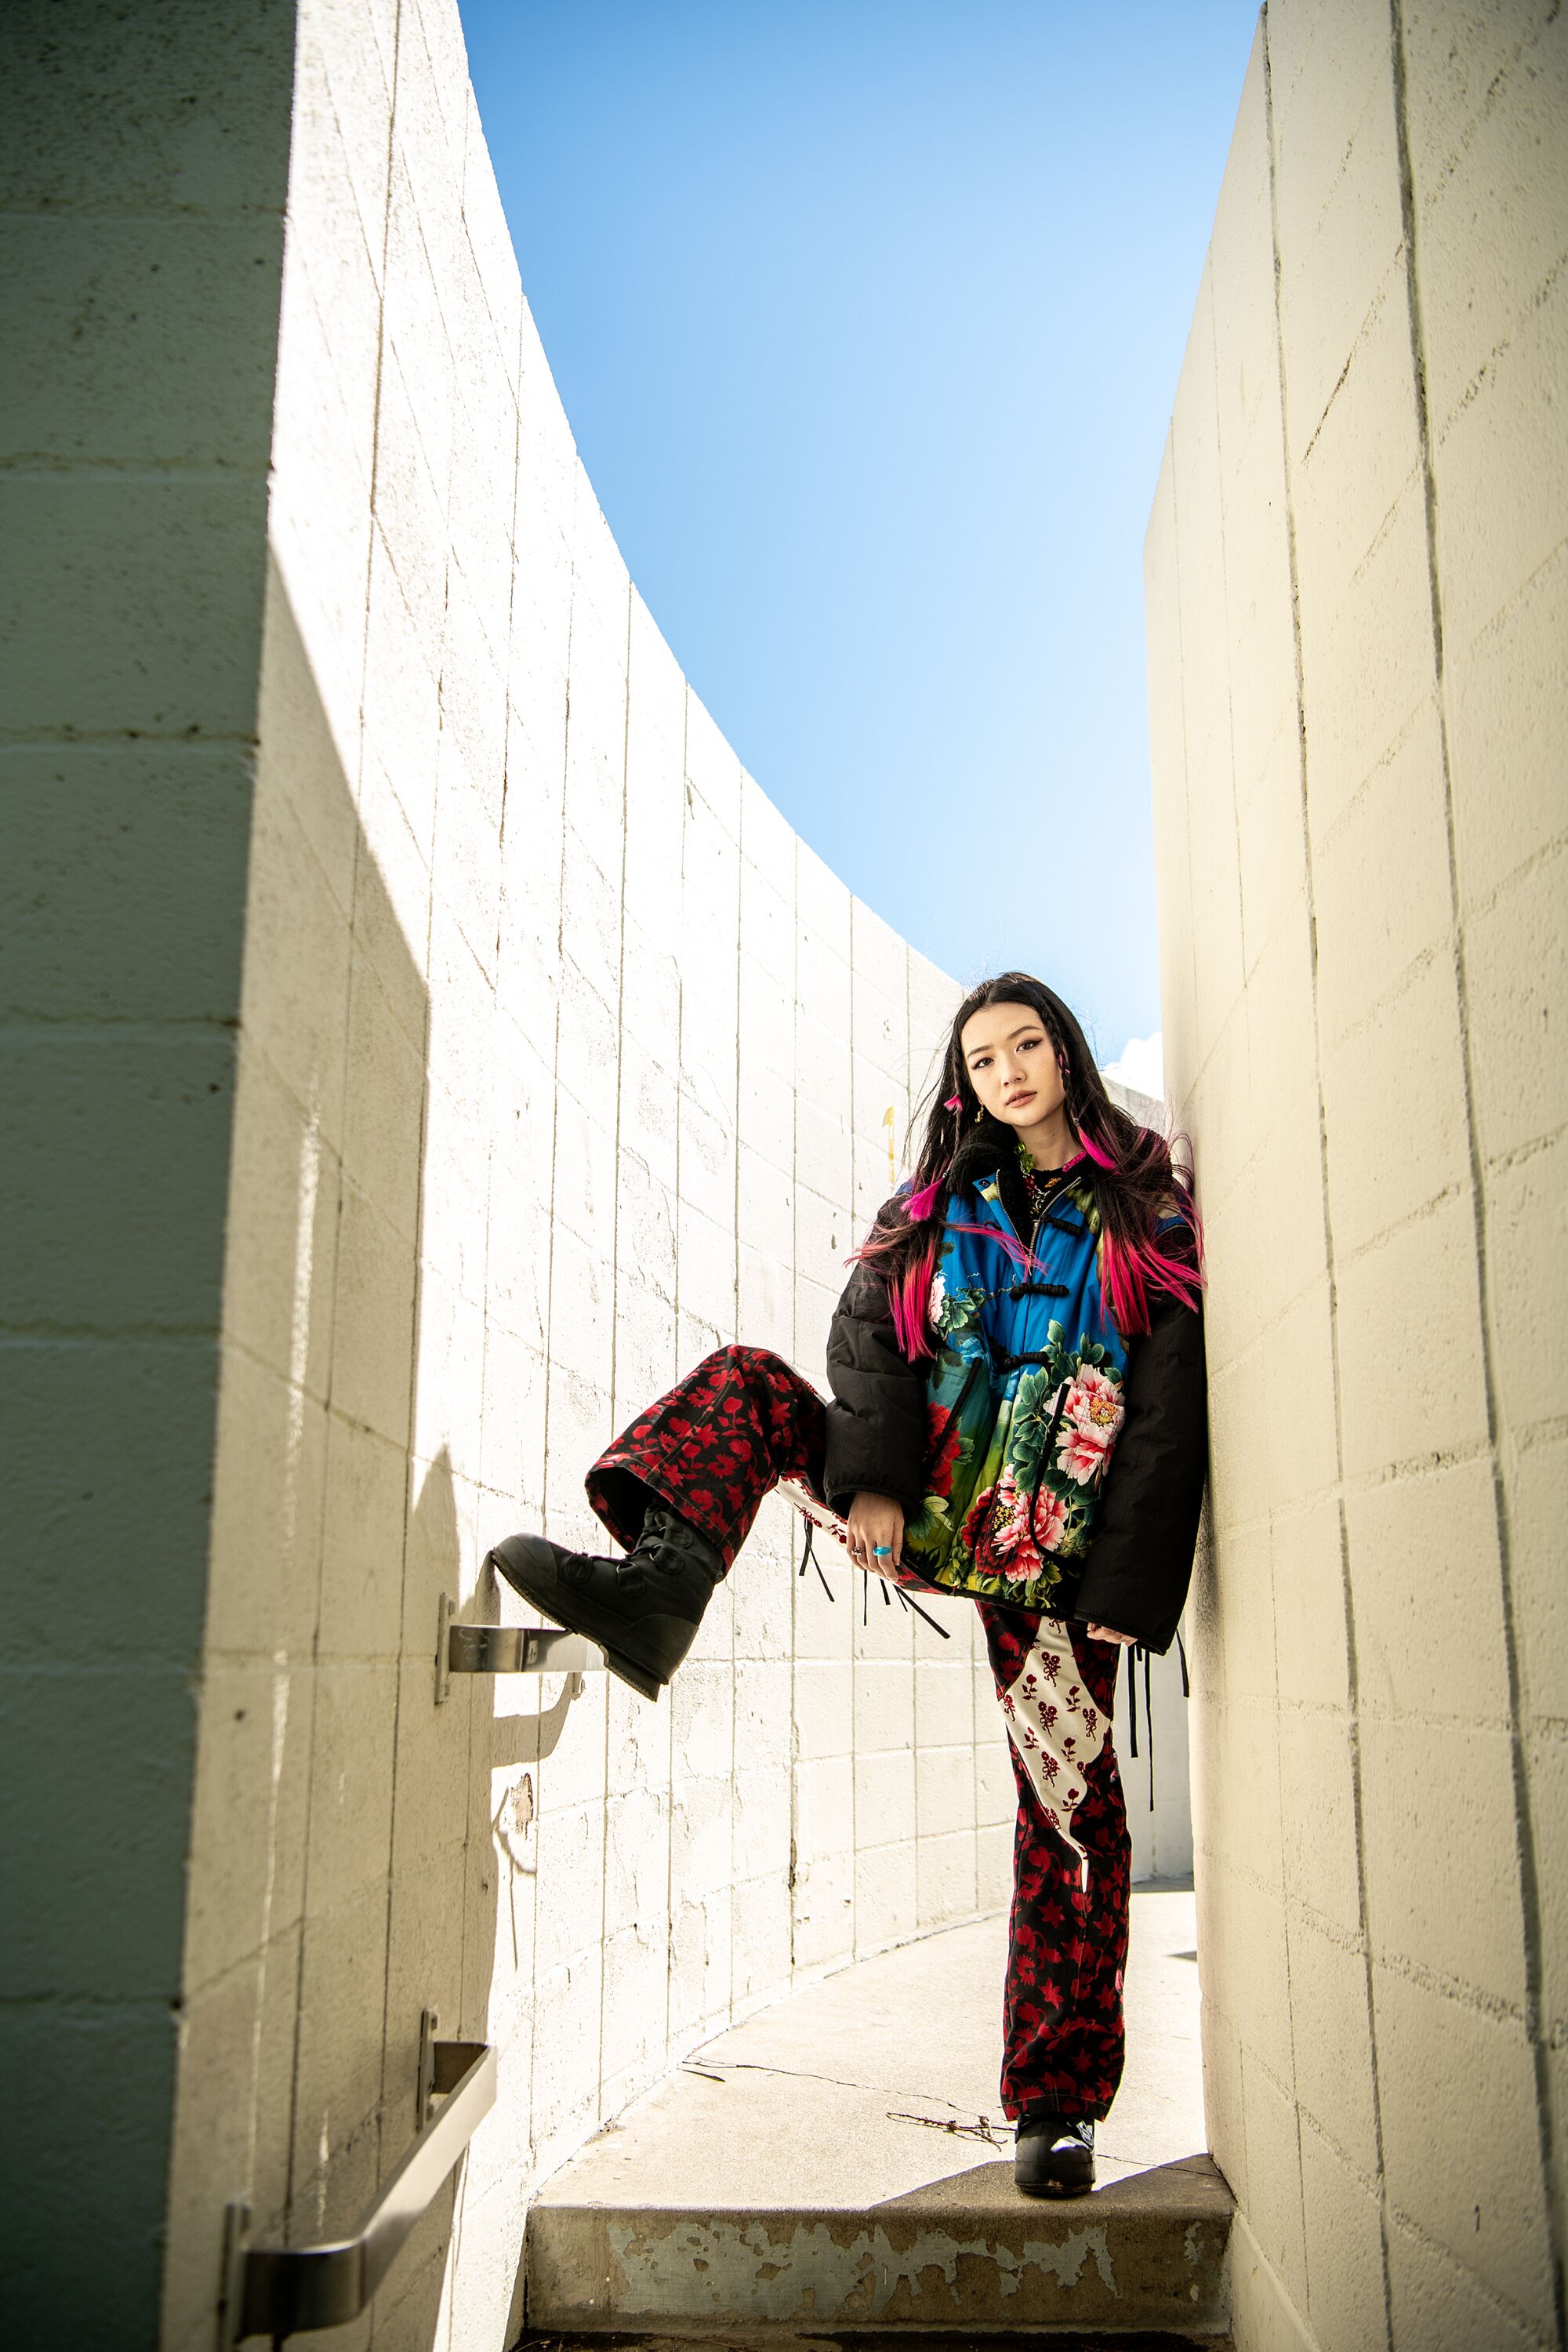 In jacquard Chopova Lowena pants and a bunny and peony adorned Mukzin jacket, Qian is no stranger to mixing patterns.